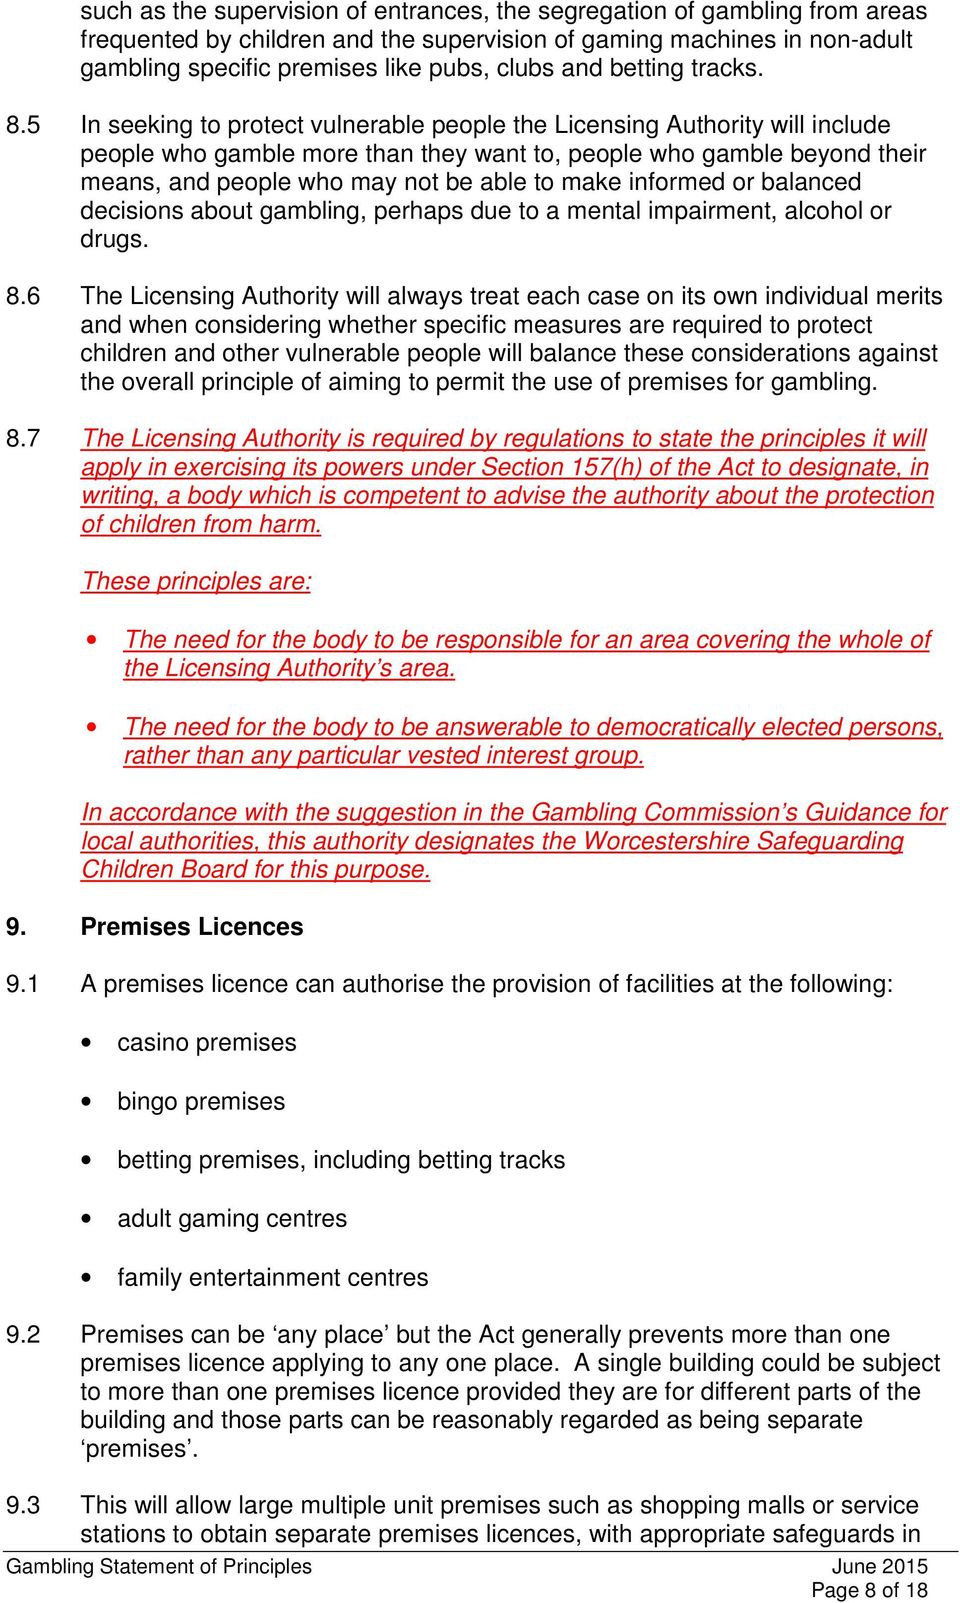 5 In seeking to protect vulnerable people the Licensing Authority will include people who gamble more than they want to, people who gamble beyond their means, and people who may not be able to make